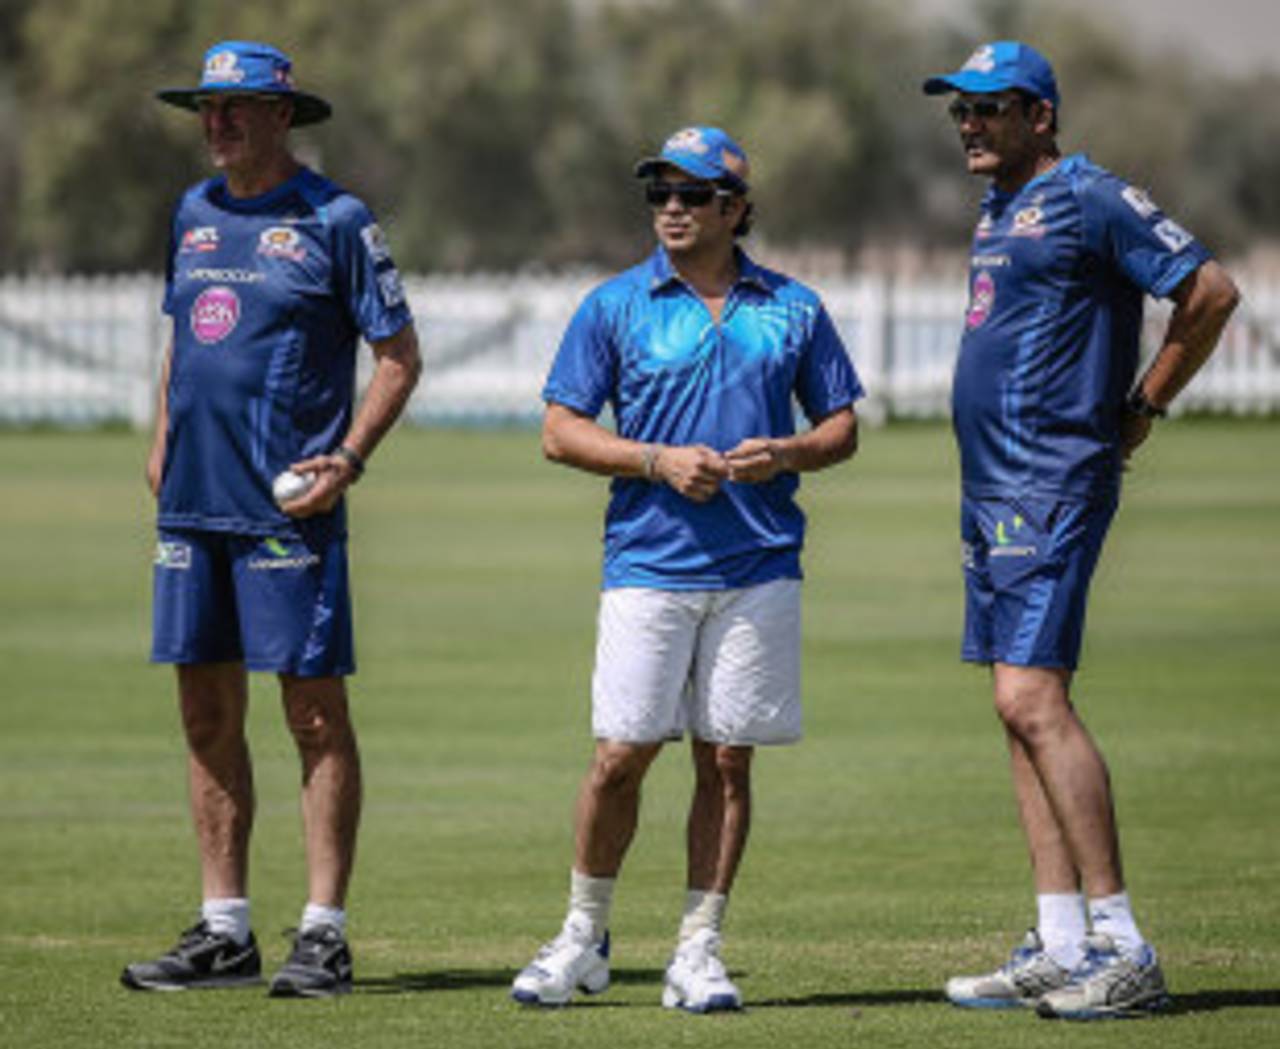 The collection of former superstars as coaches in the Mumbai Indians team may be intimidating for some of the younger players&nbsp;&nbsp;&bull;&nbsp;&nbsp;Mumbai Indians